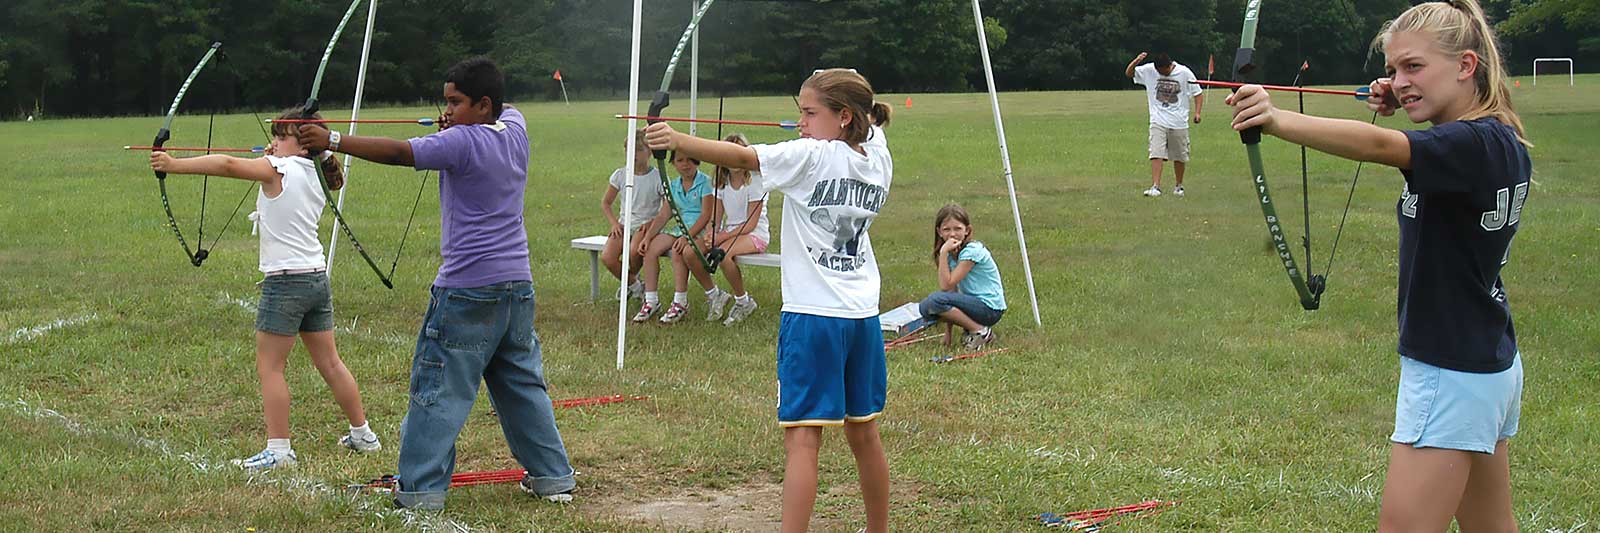 photo of kids with archery equipment